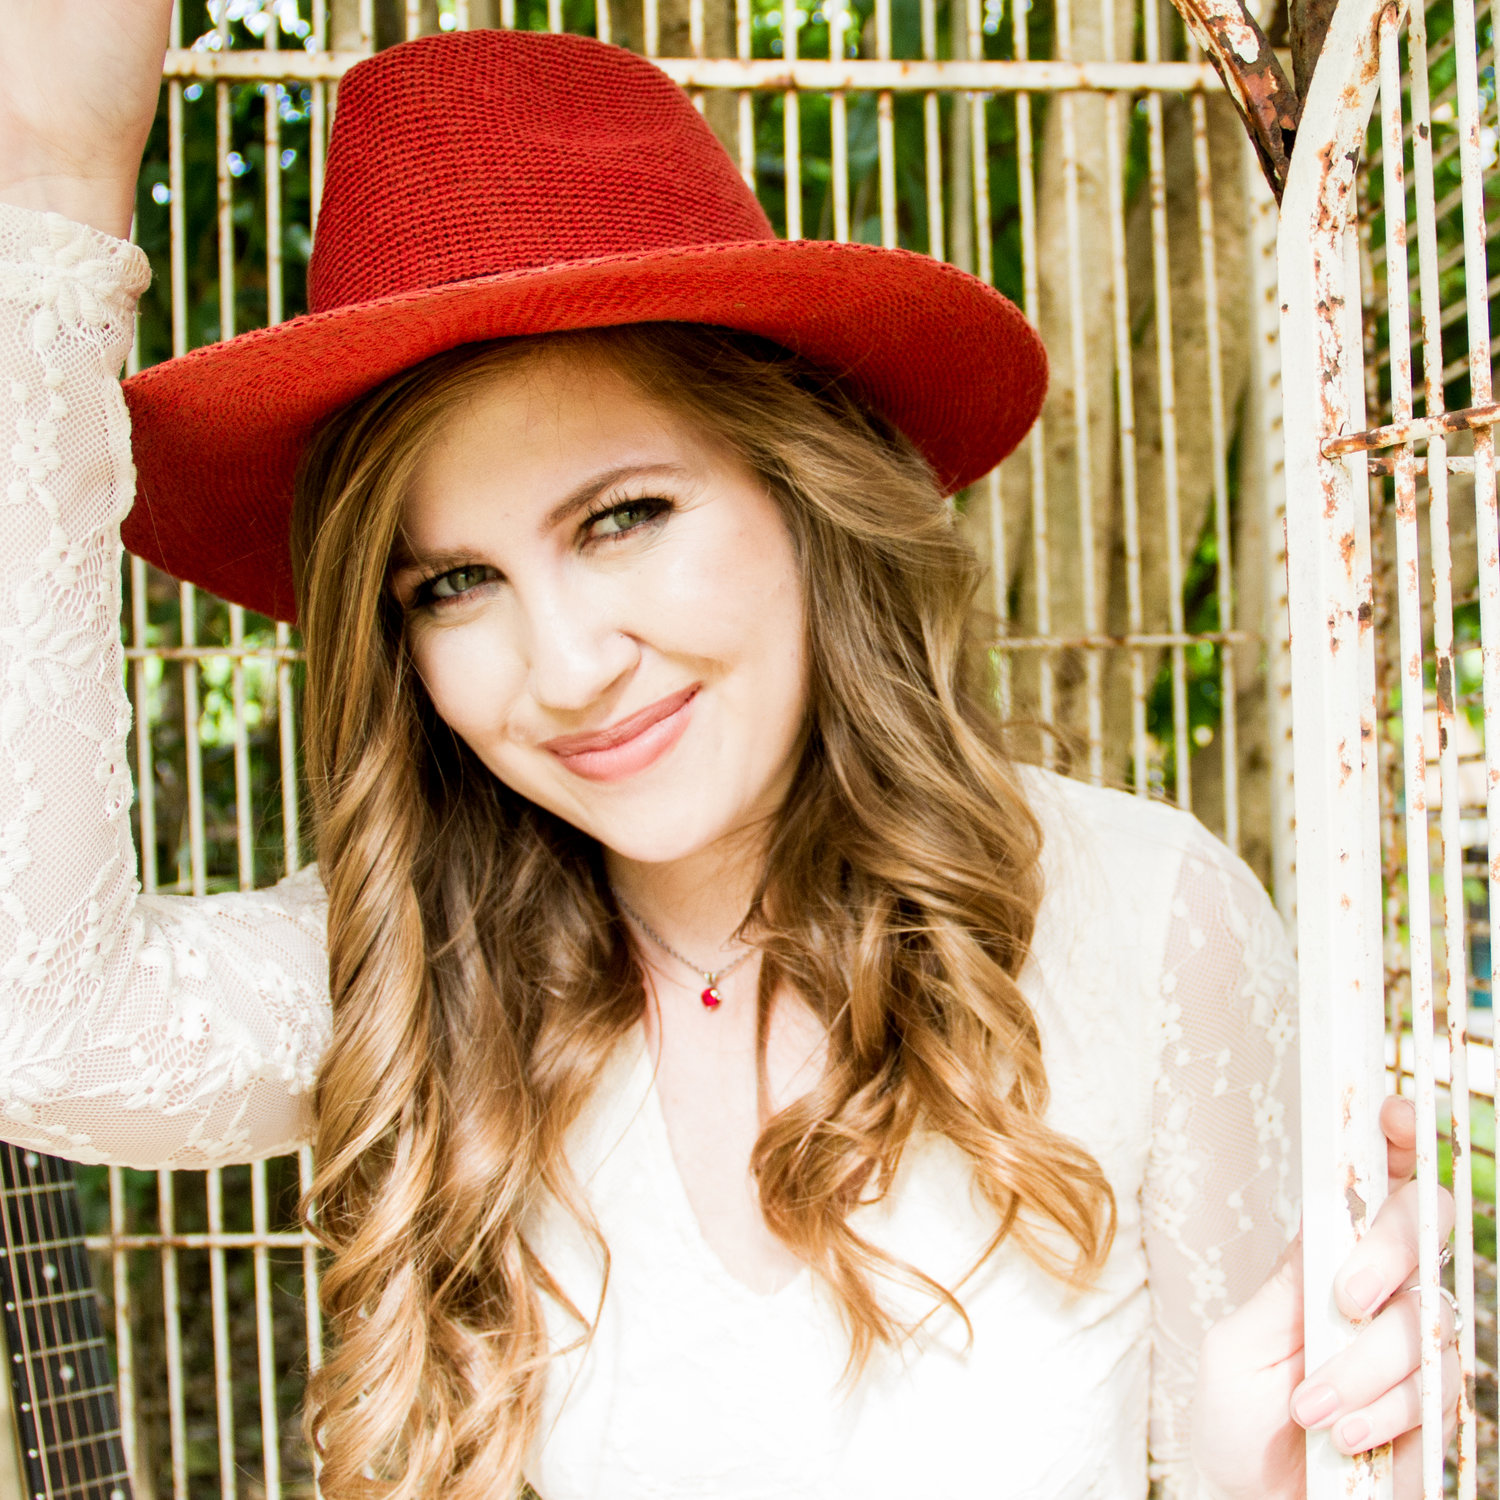 Austin recording artist Bethany Becker takes the stage at 2:30 p.m.